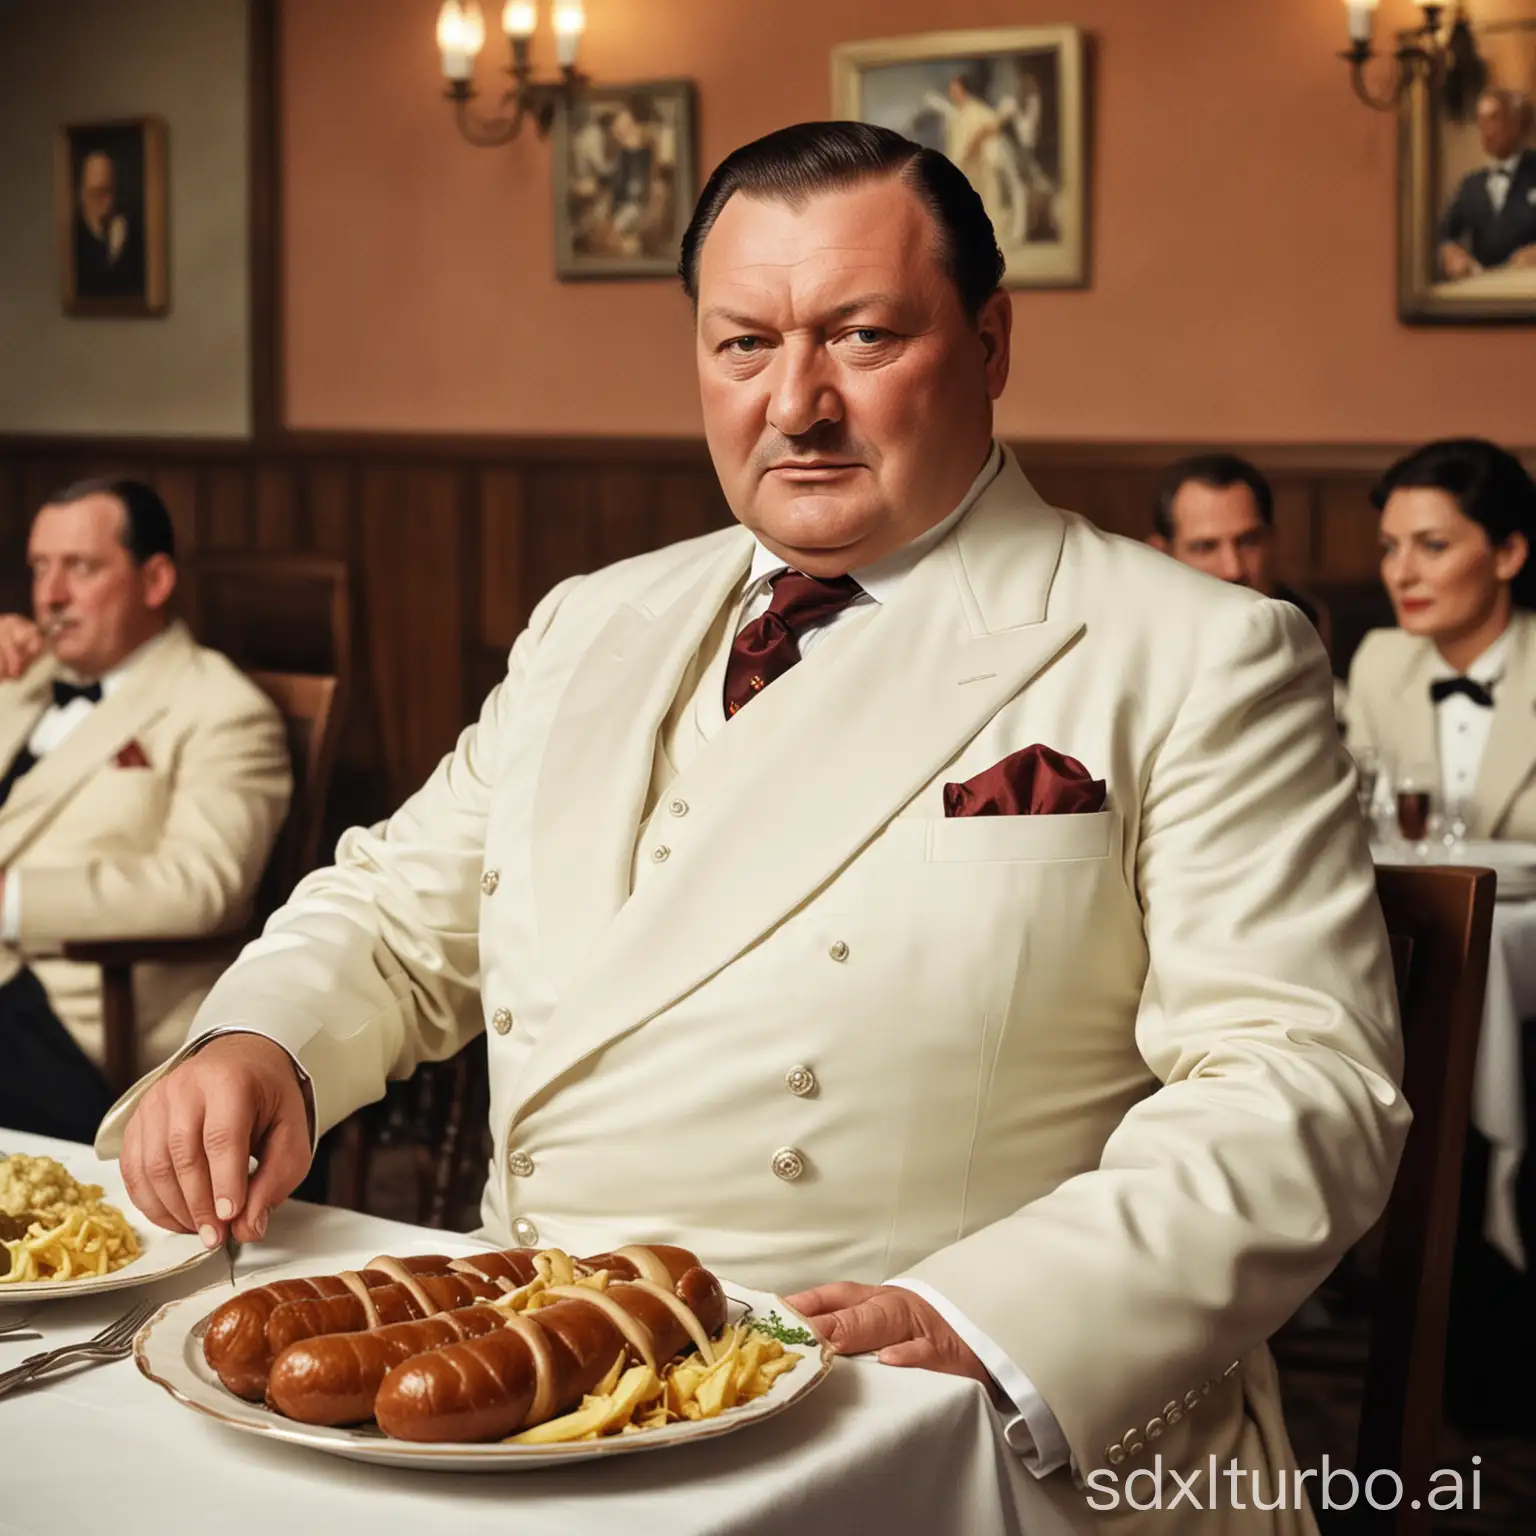 old color photo depicting fat Hermann Göring in white tuxedo sitting German restaurant with lots of bratwurst on a plate